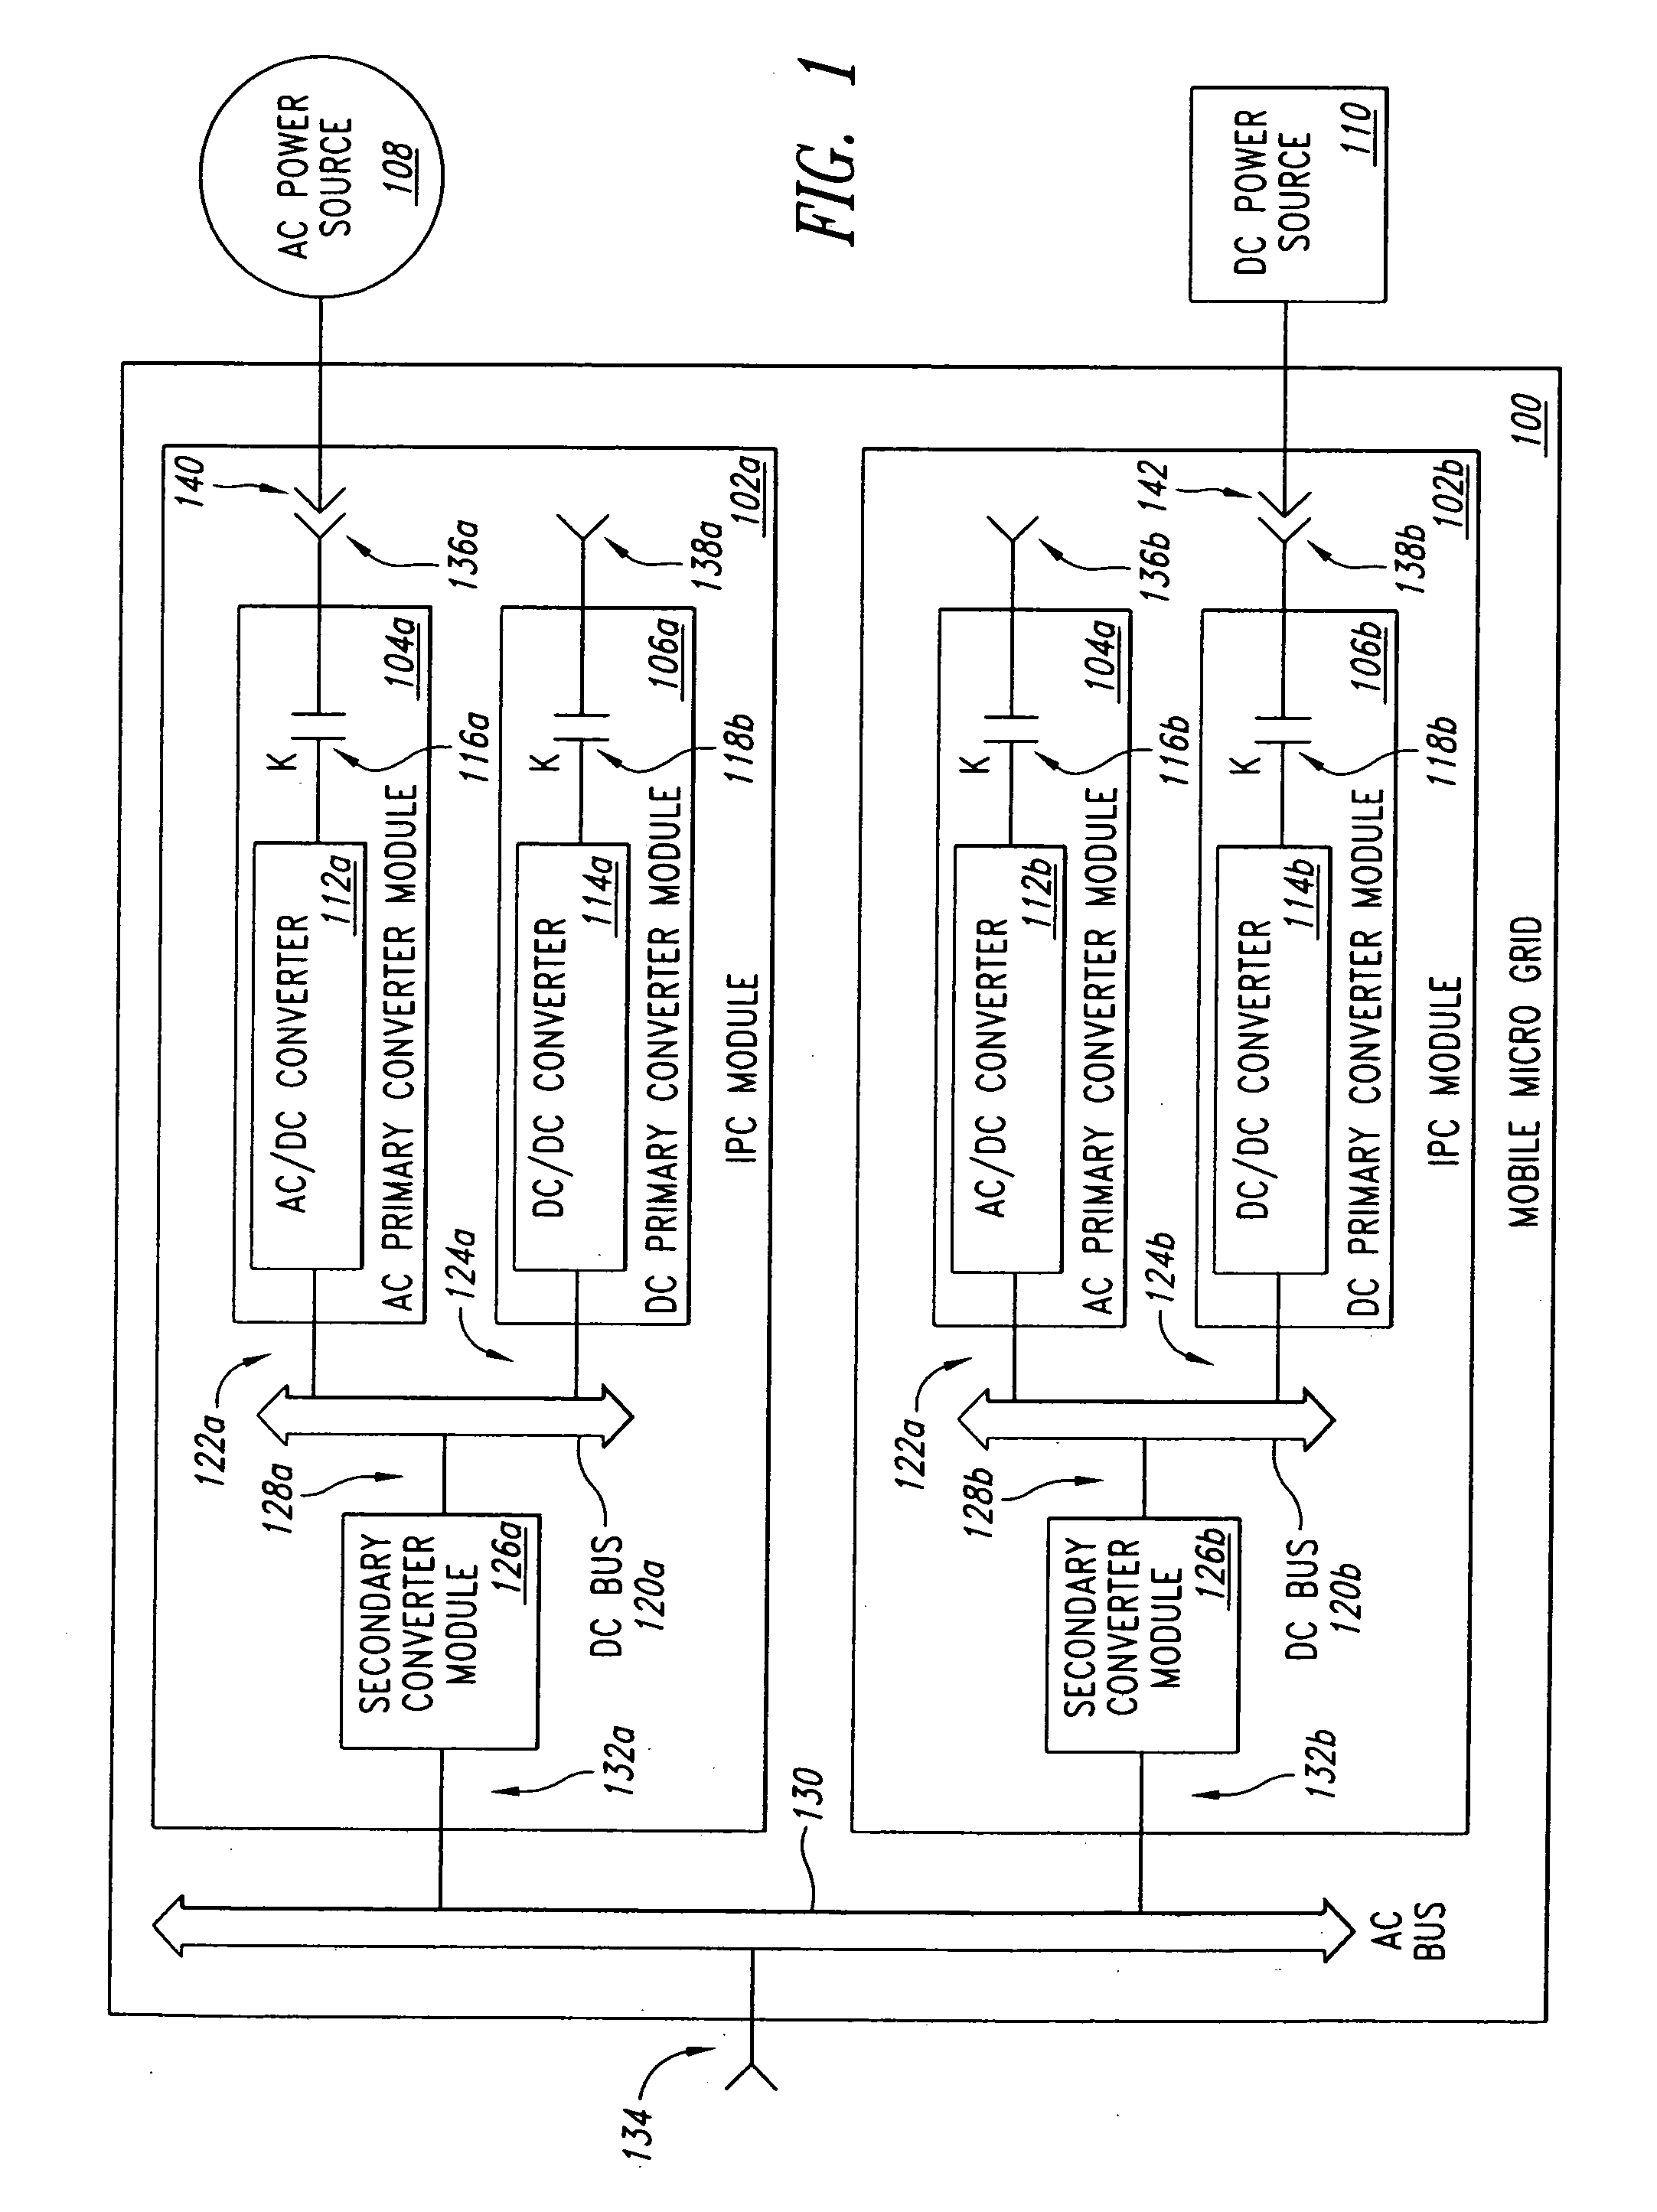 System and method for controlling power flow in a power system